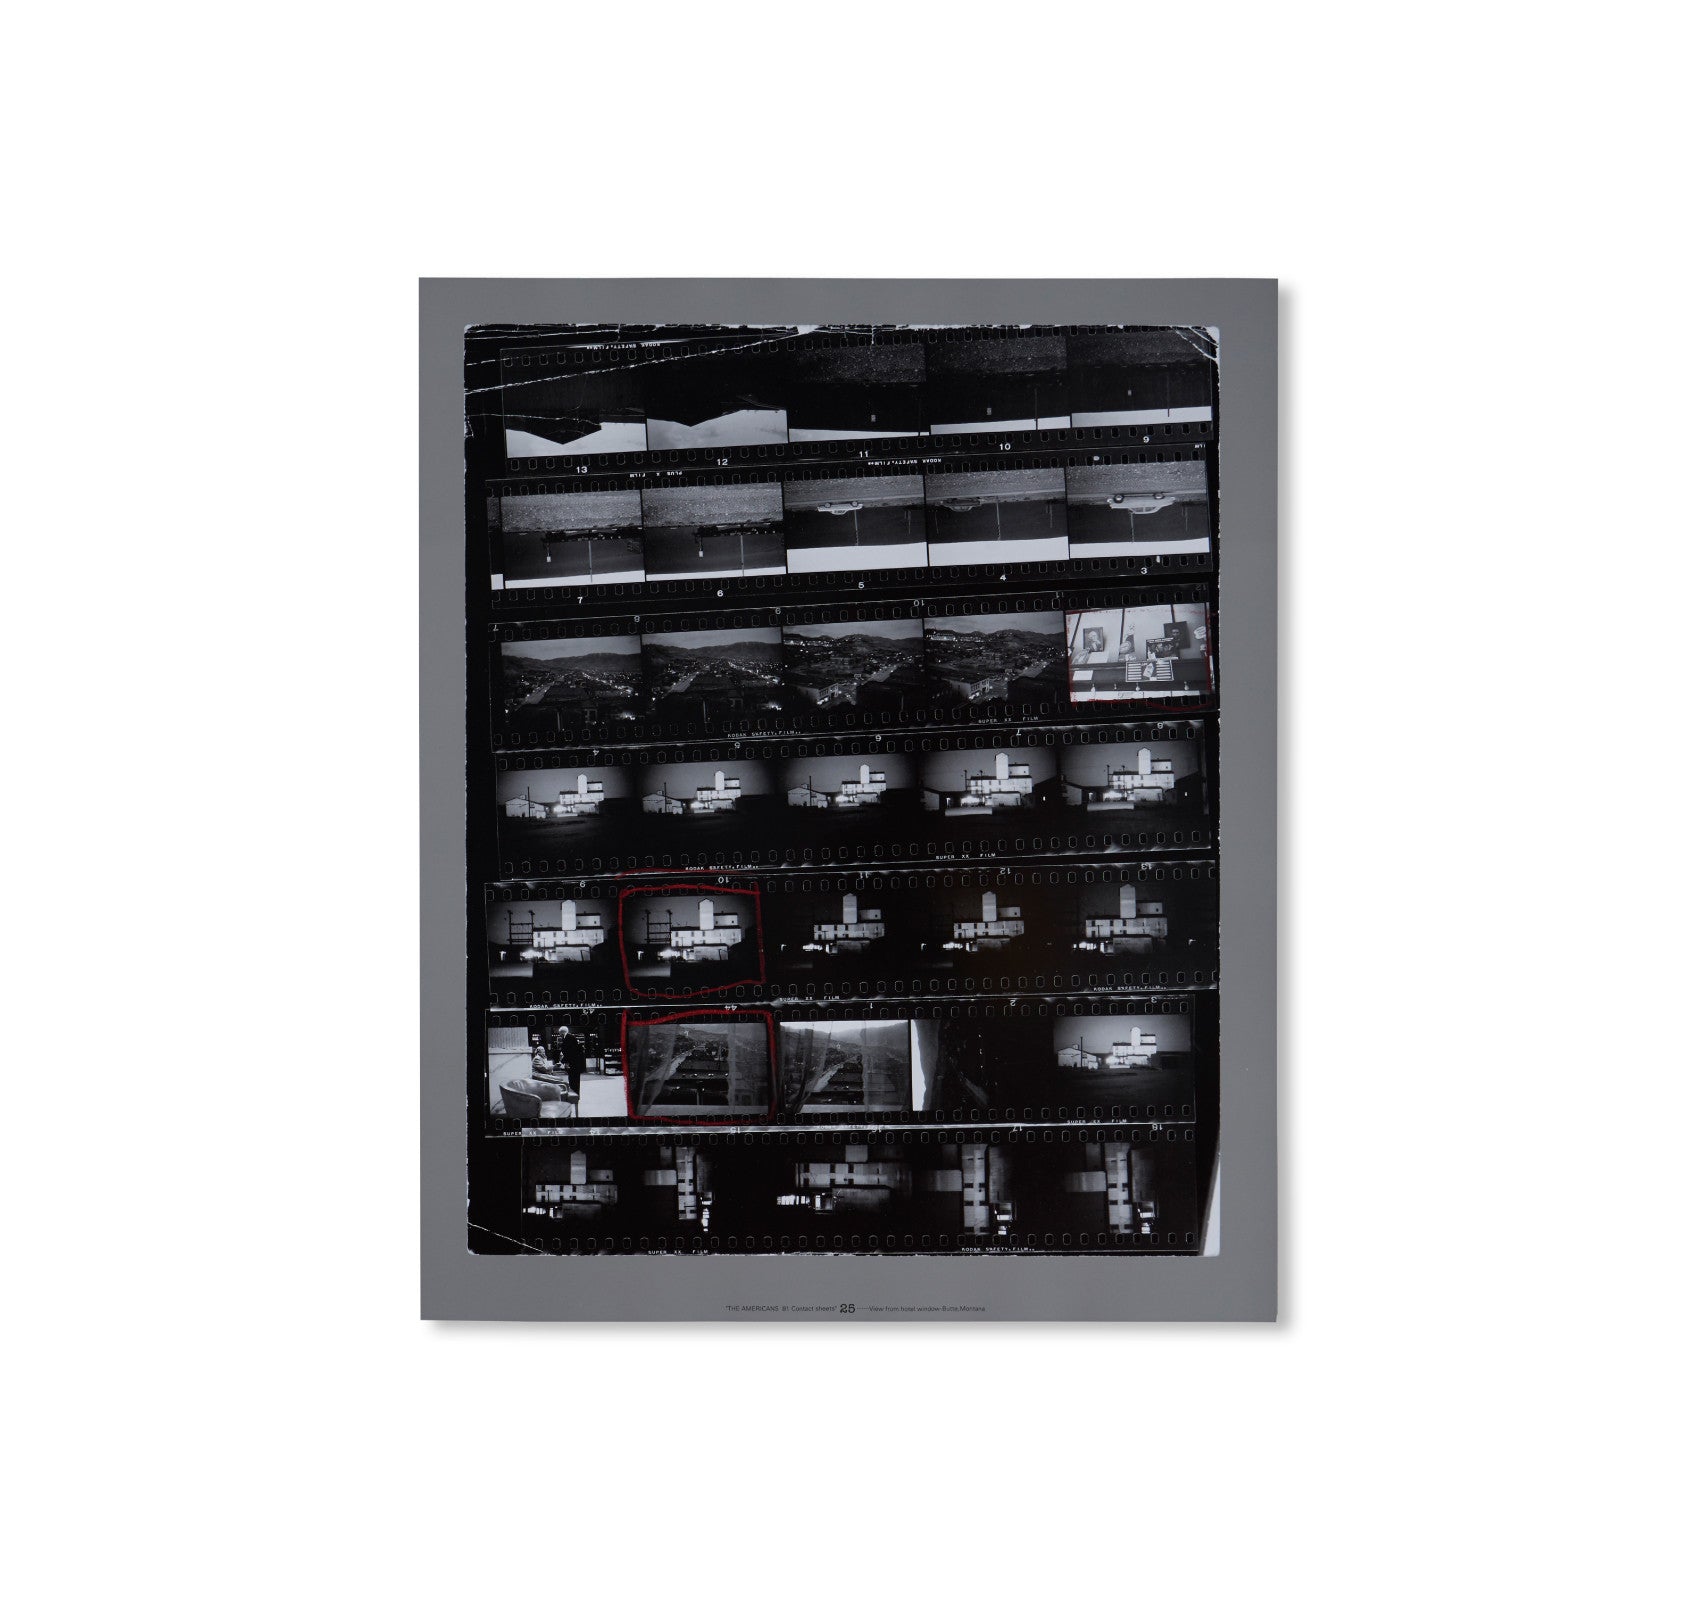 THE AMERICANS, 81 CONTACT SHEETS (FOLDING BOARD BOX) by Robert Frank [RARE]